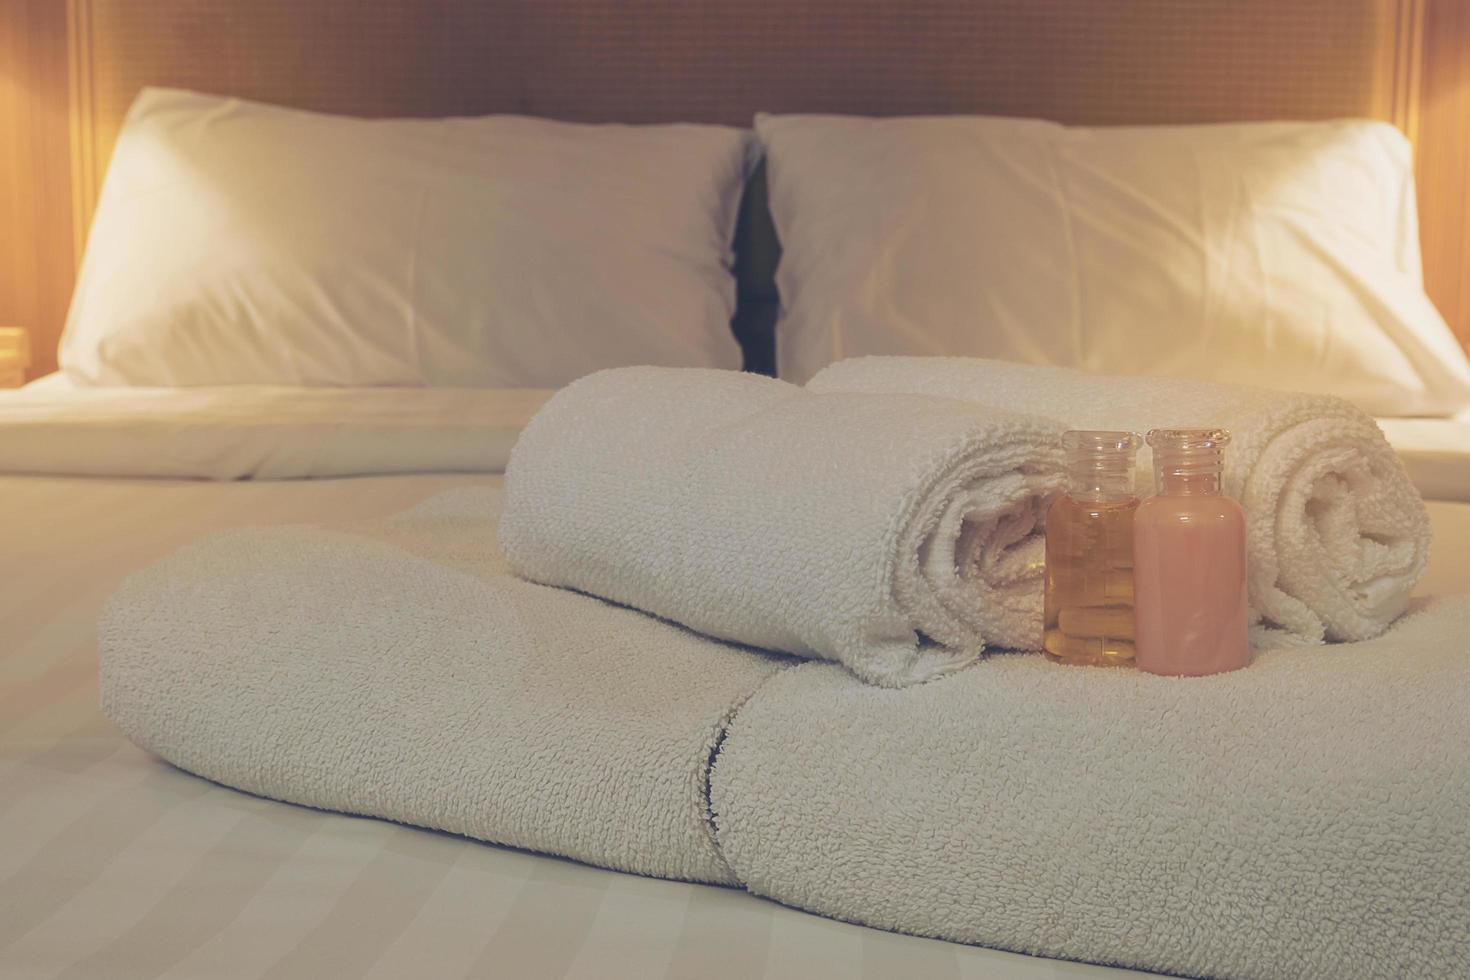 Hotel towel with shampoo and soap bottle set on white bed photo